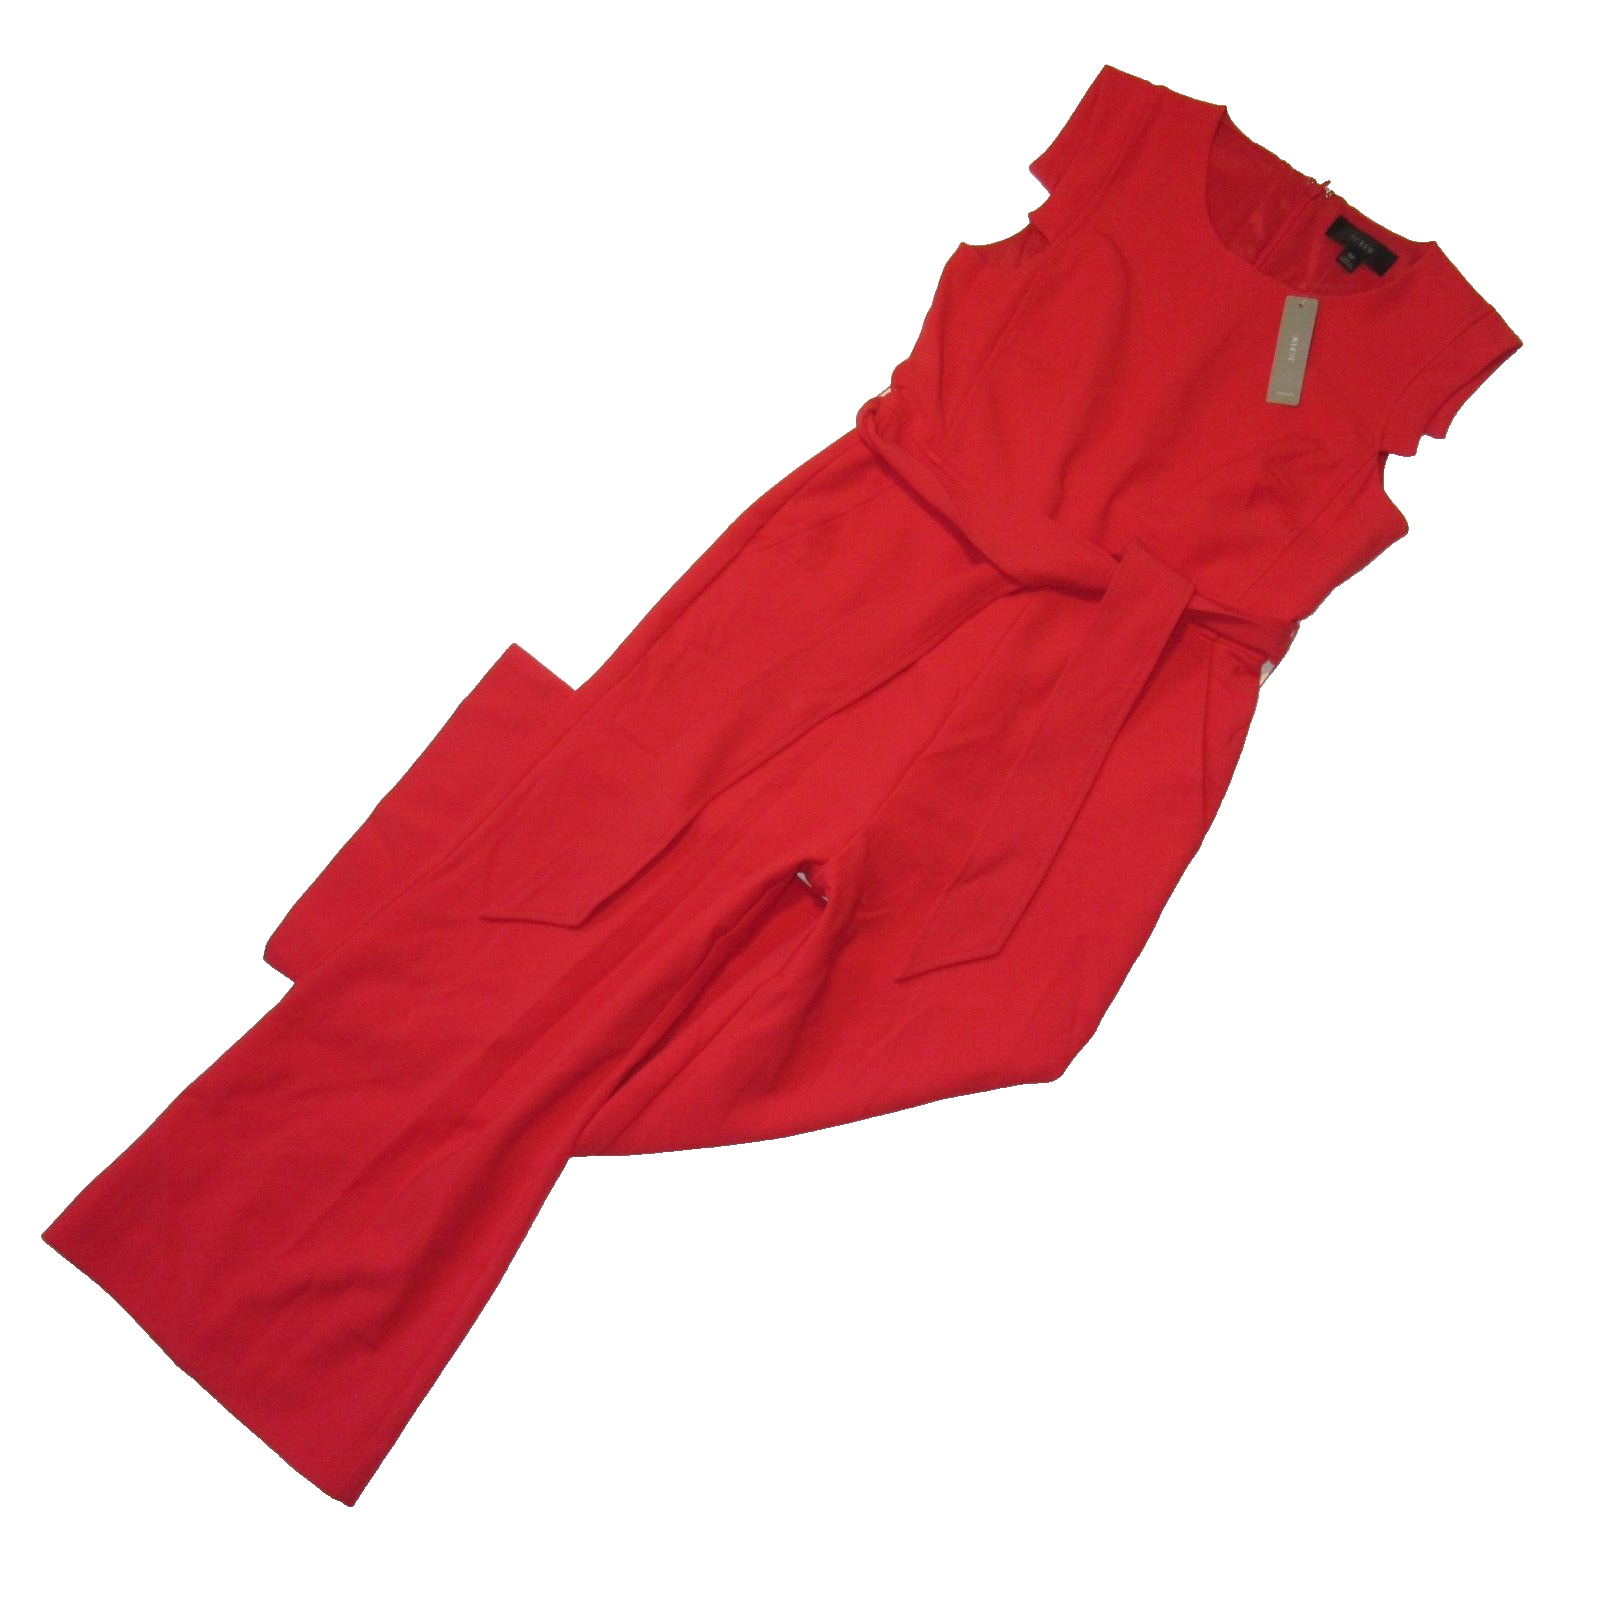 Primary image for NWT J.Crew Resume Jumpsuit in Bright Cerise Stretch Crepe Belted Wide Leg  6P